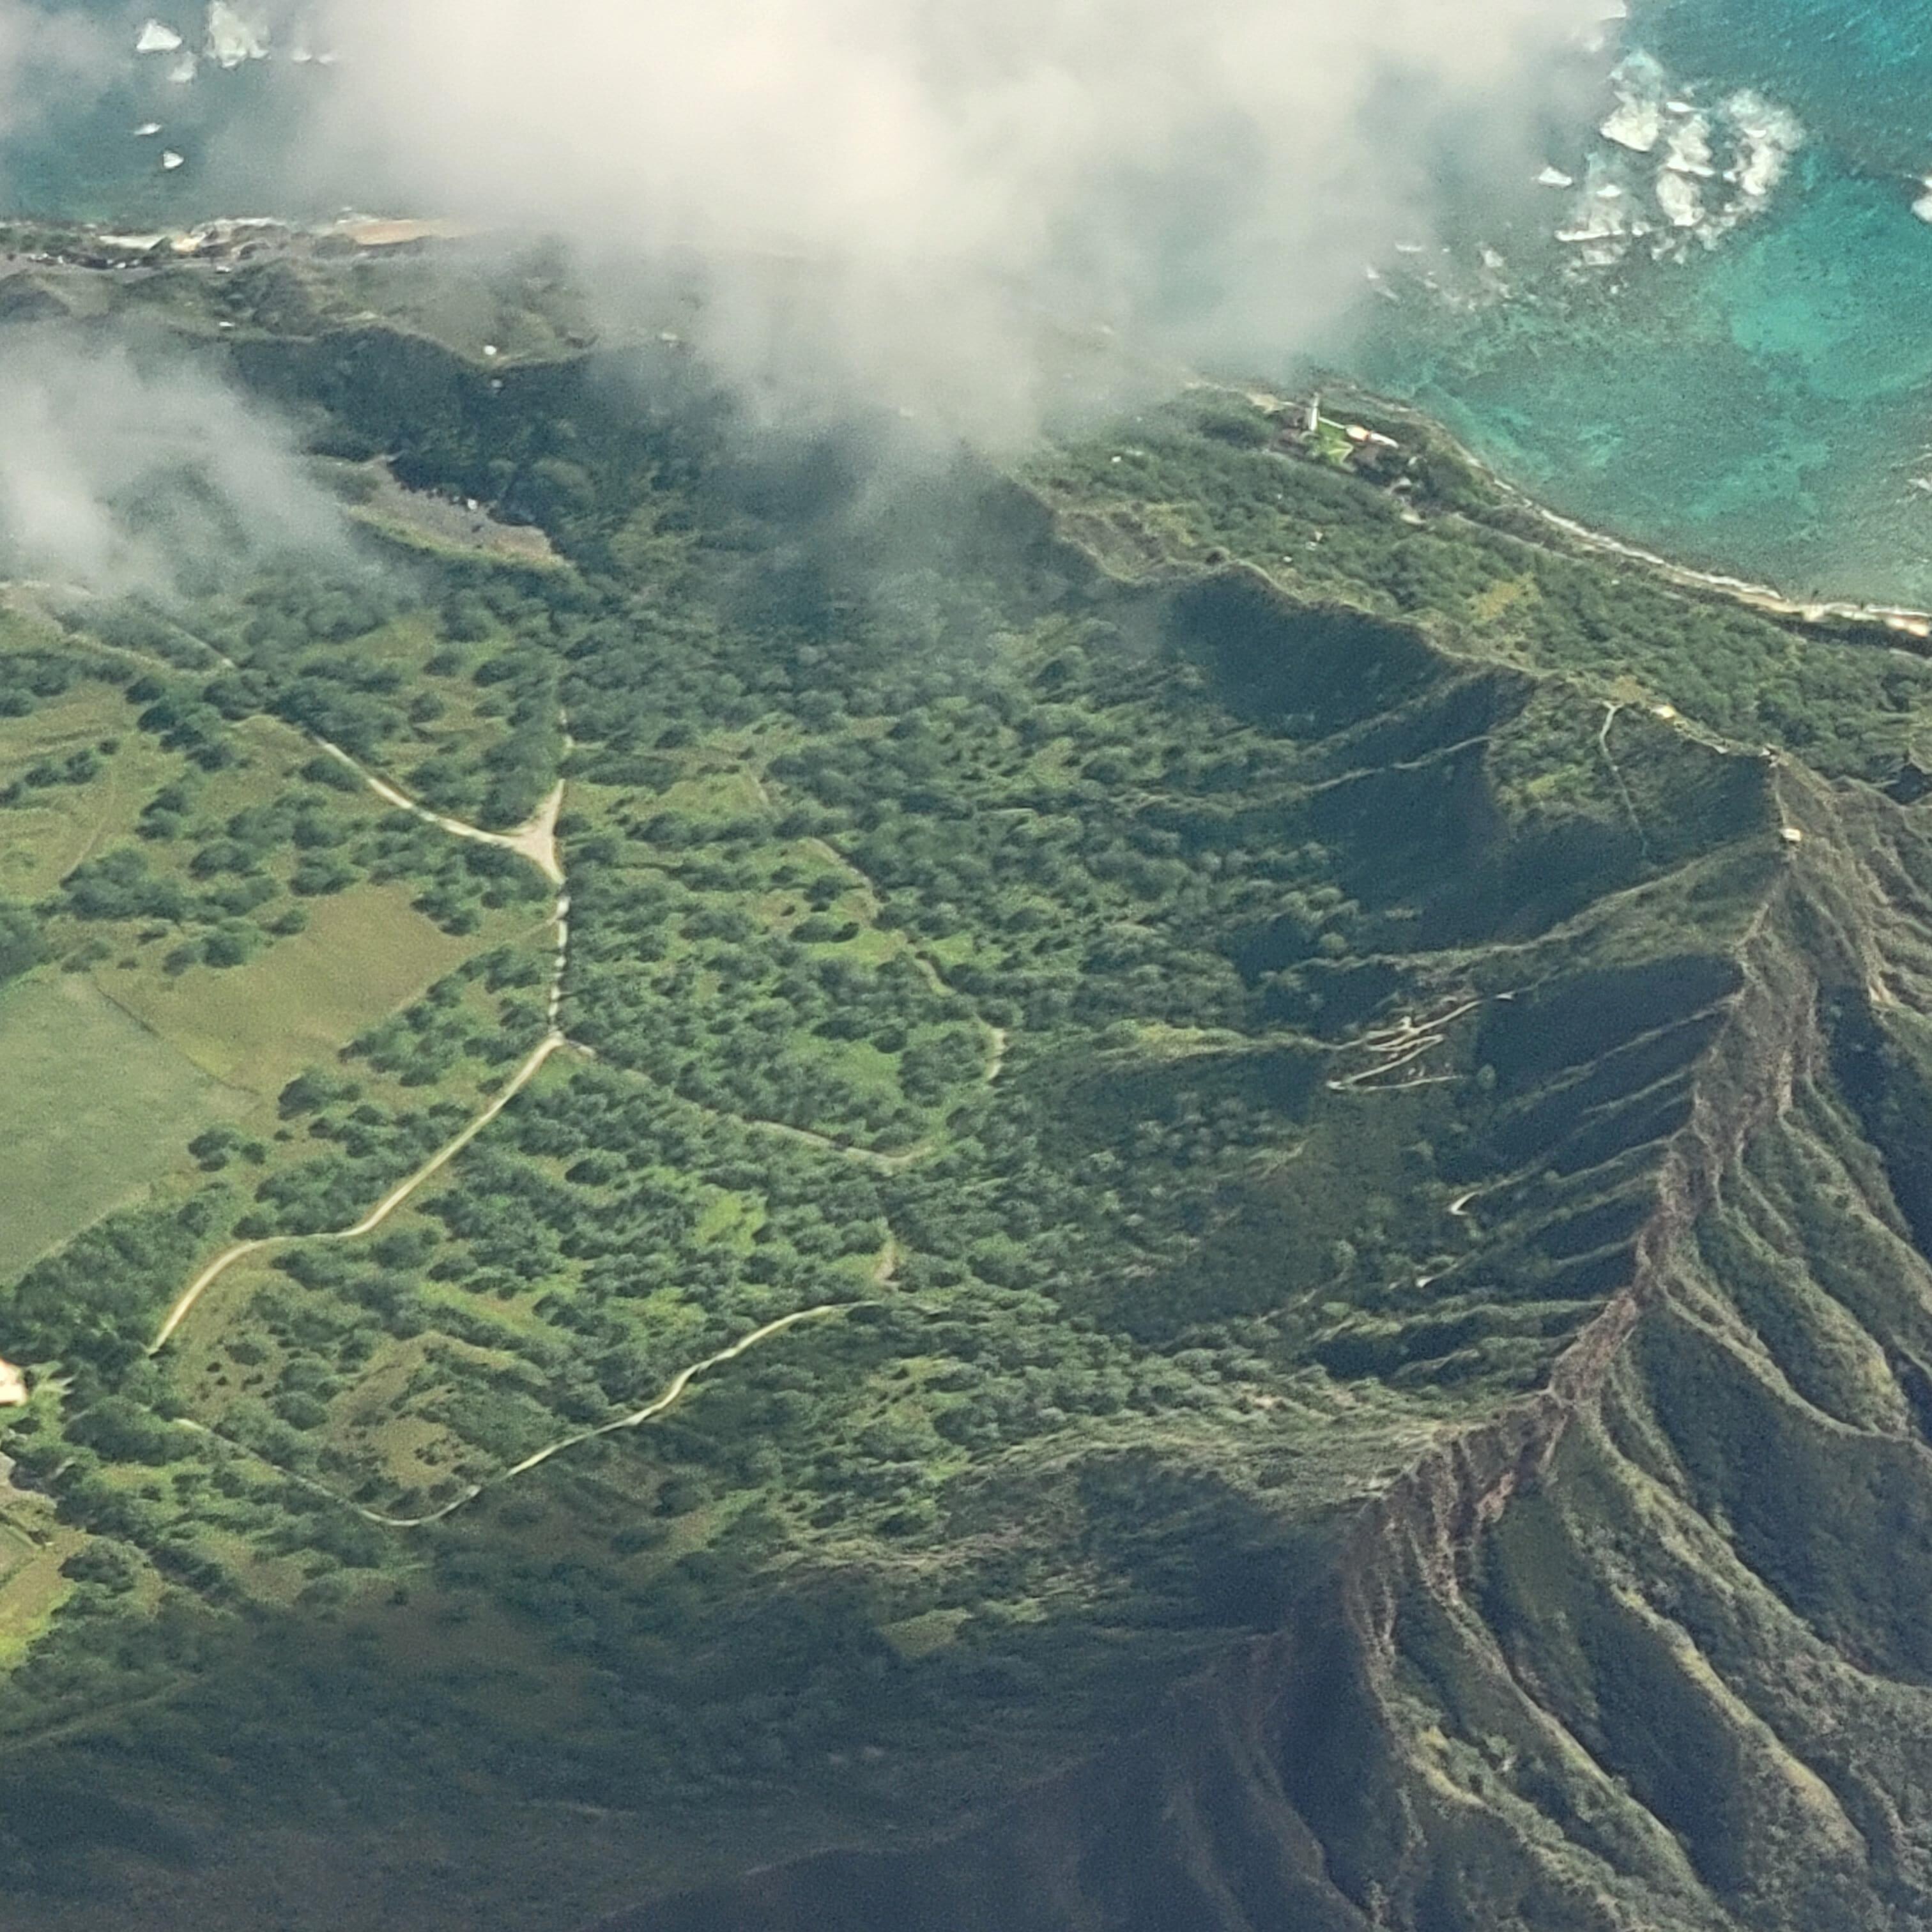 Views from the Flight into Hawaii